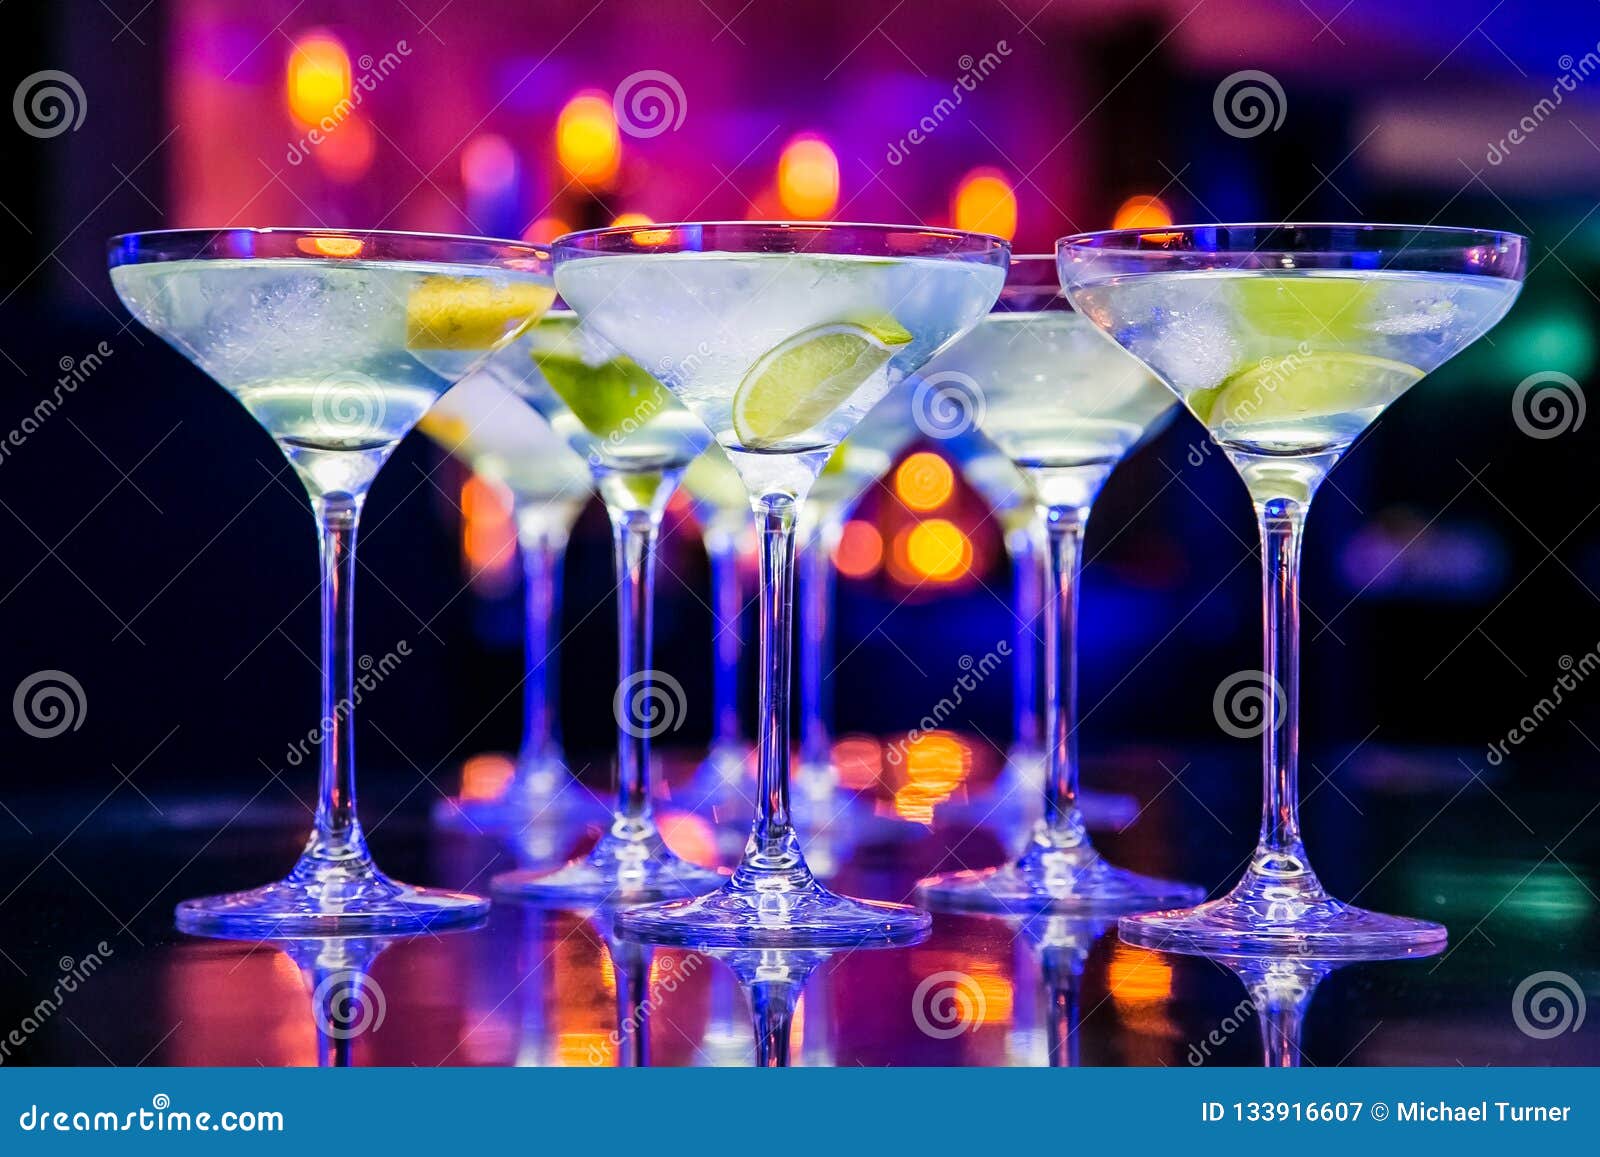 new year drinks for gala dinner or cocktail party event